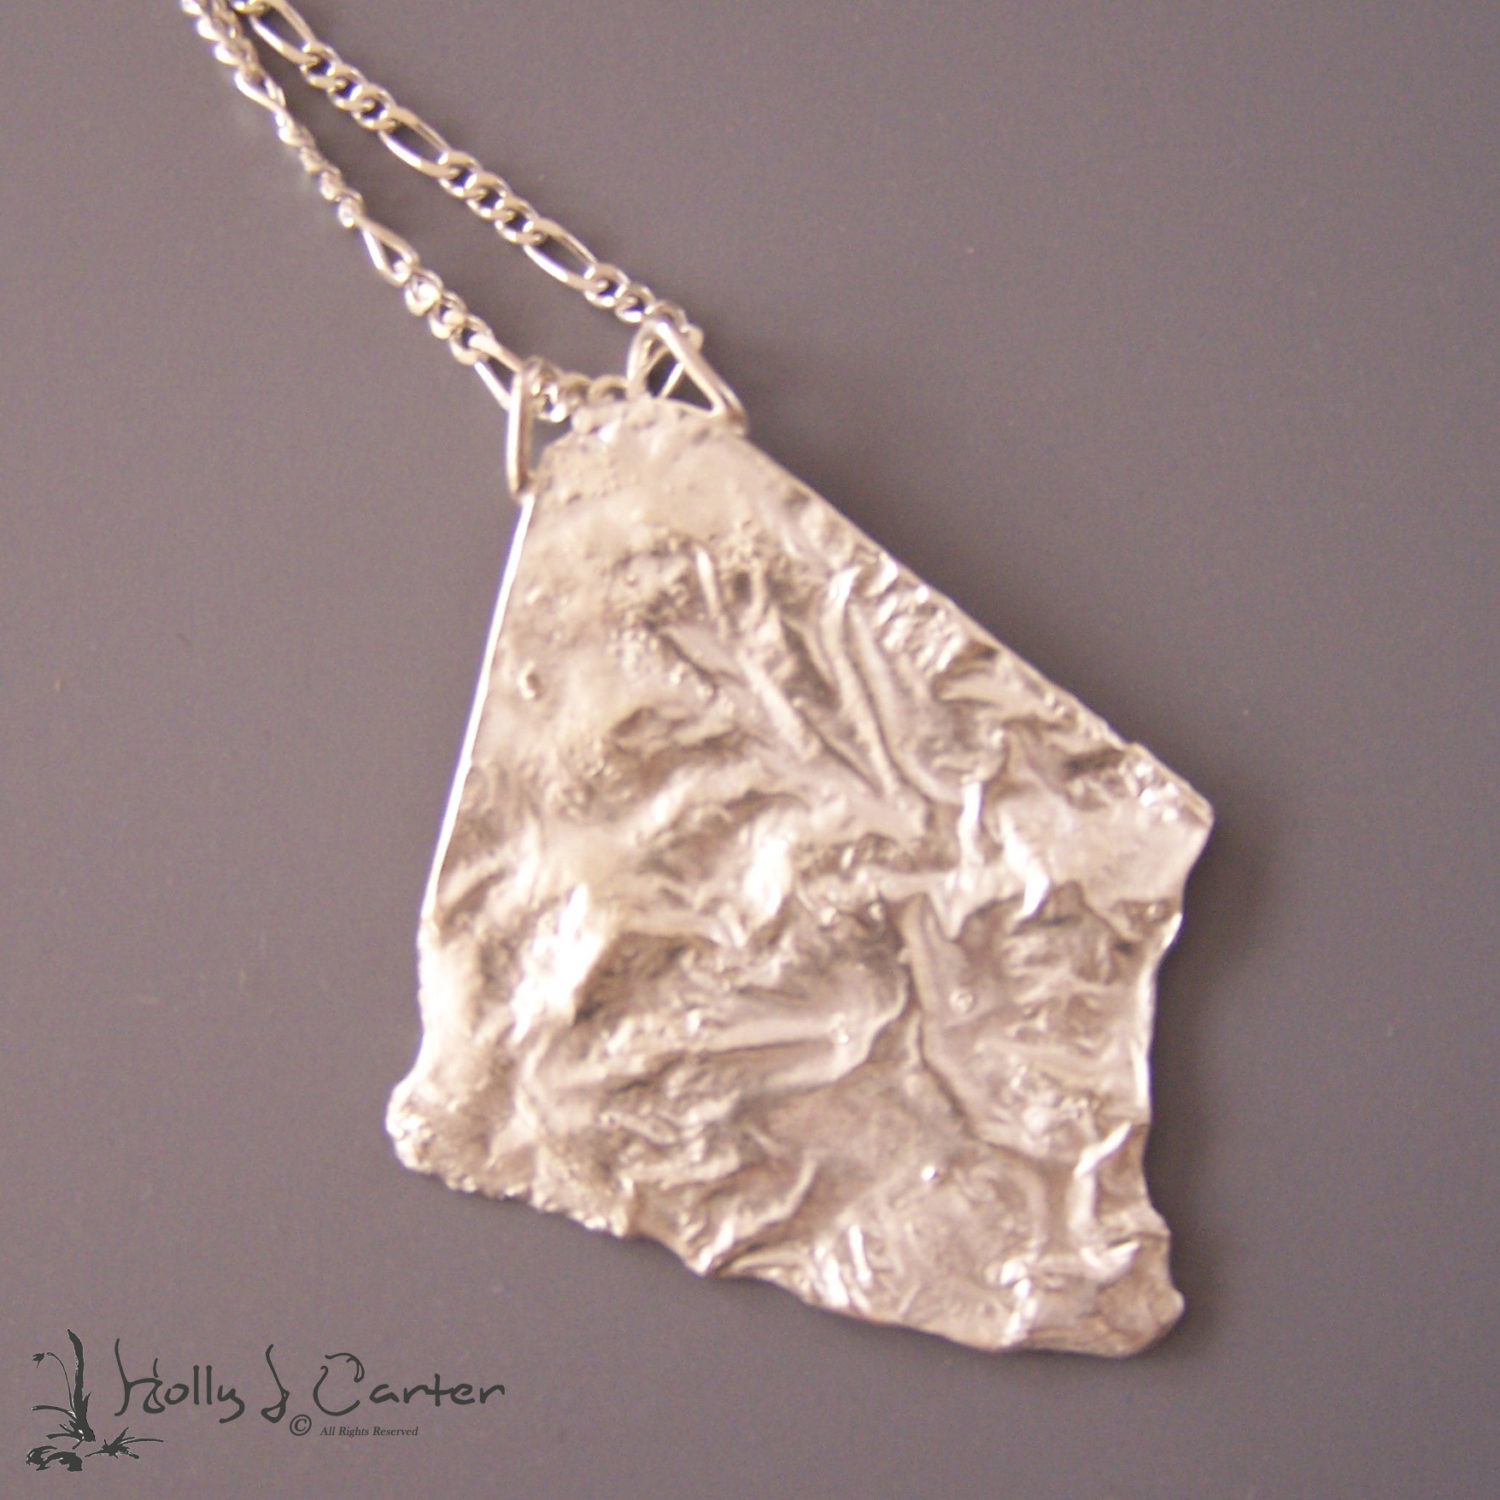 Landscapes Reticulated Sterling Silver Pendant by Holly J Carter